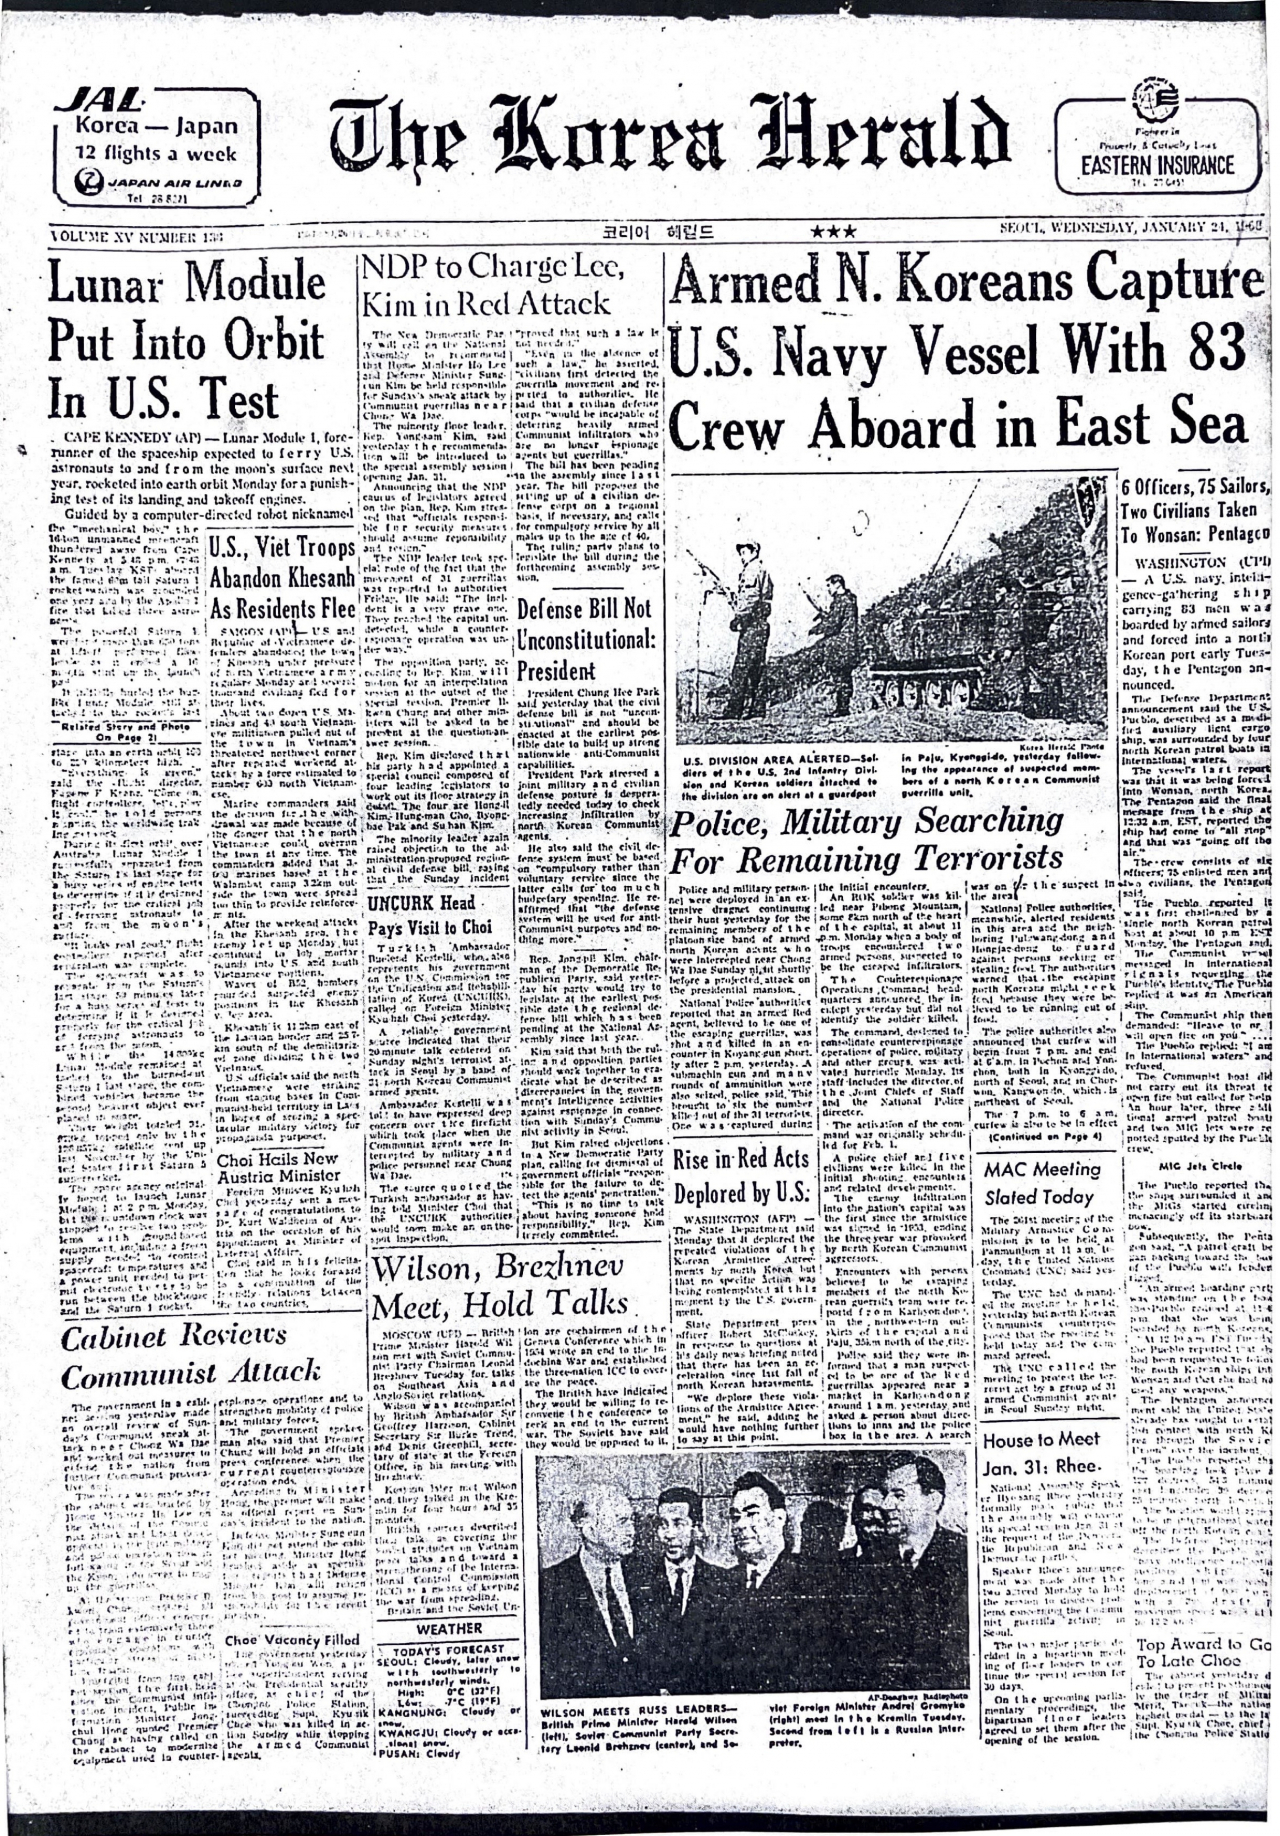 This Jan. 24, 1968 edition of The Korea Herald carries the story of how the USS Pueblo and its 83 crew were seized by North Korea the day before. (The Korea Herald)